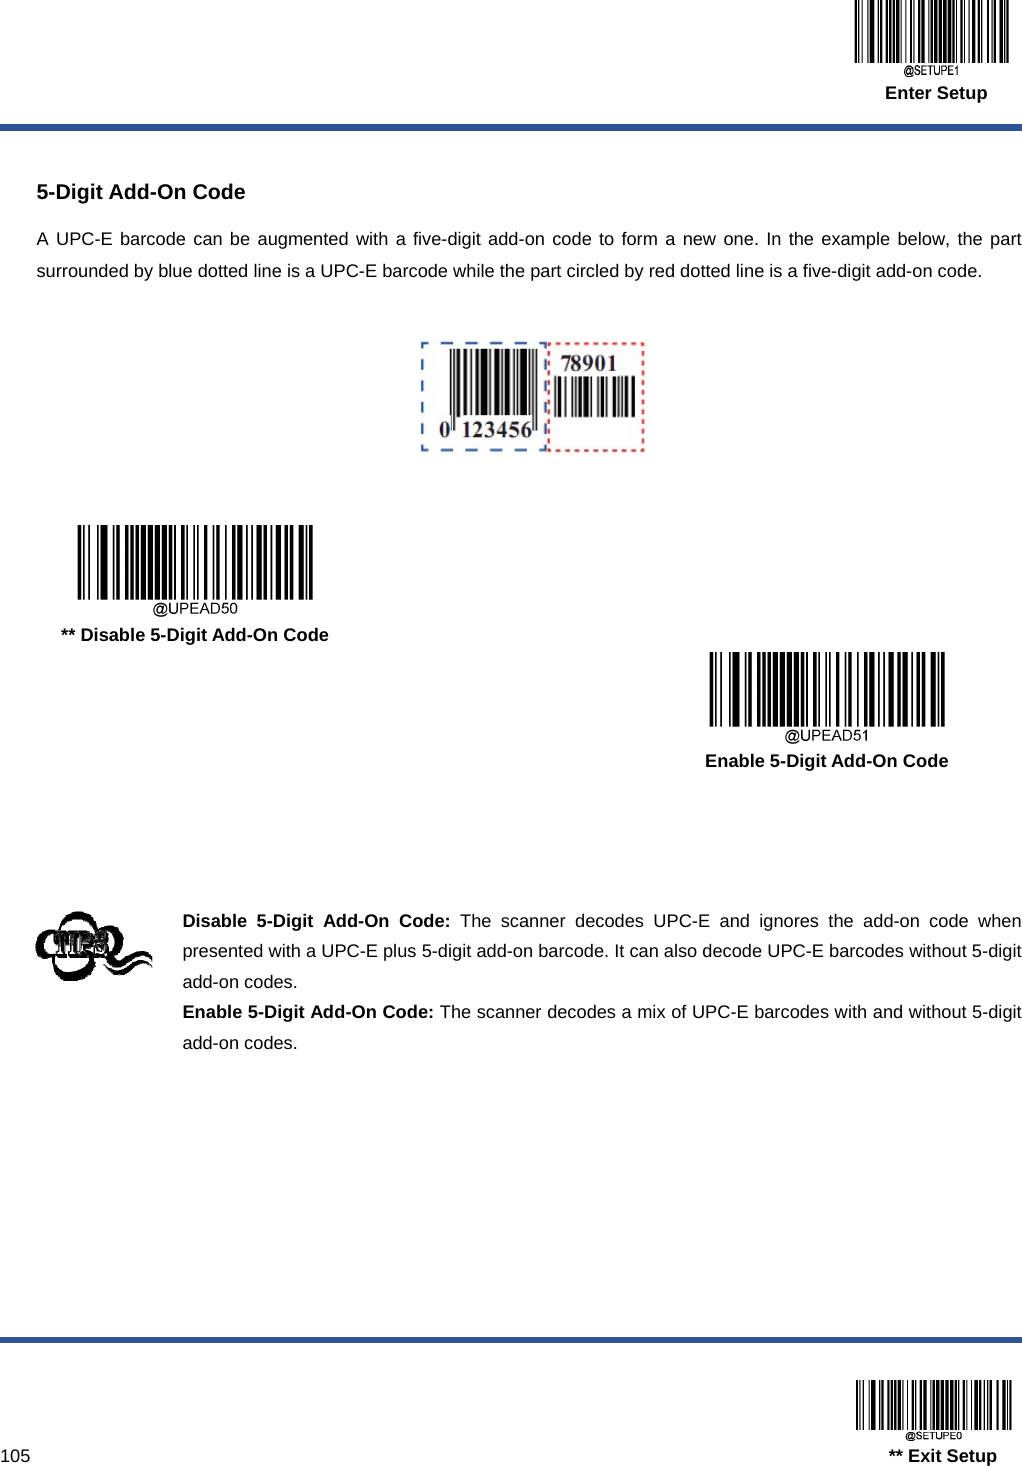  Enter Setup  105                                                                                   ** Exit Setup  5-Digit Add-On Code A UPC-E barcode can be augmented with a five-digit add-on code to form a new one. In the example below, the part surrounded by blue dotted line is a UPC-E barcode while the part circled by red dotted line is a five-digit add-on code.        ** Disable 5-Digit Add-On Code      Enable 5-Digit Add-On Code     Disable 5-Digit Add-On Code: The scanner decodes UPC-E and ignores the add-on code when presented with a UPC-E plus 5-digit add-on barcode. It can also decode UPC-E barcodes without 5-digit add-on codes. Enable 5-Digit Add-On Code: The scanner decodes a mix of UPC-E barcodes with and without 5-digit add-on codes. 